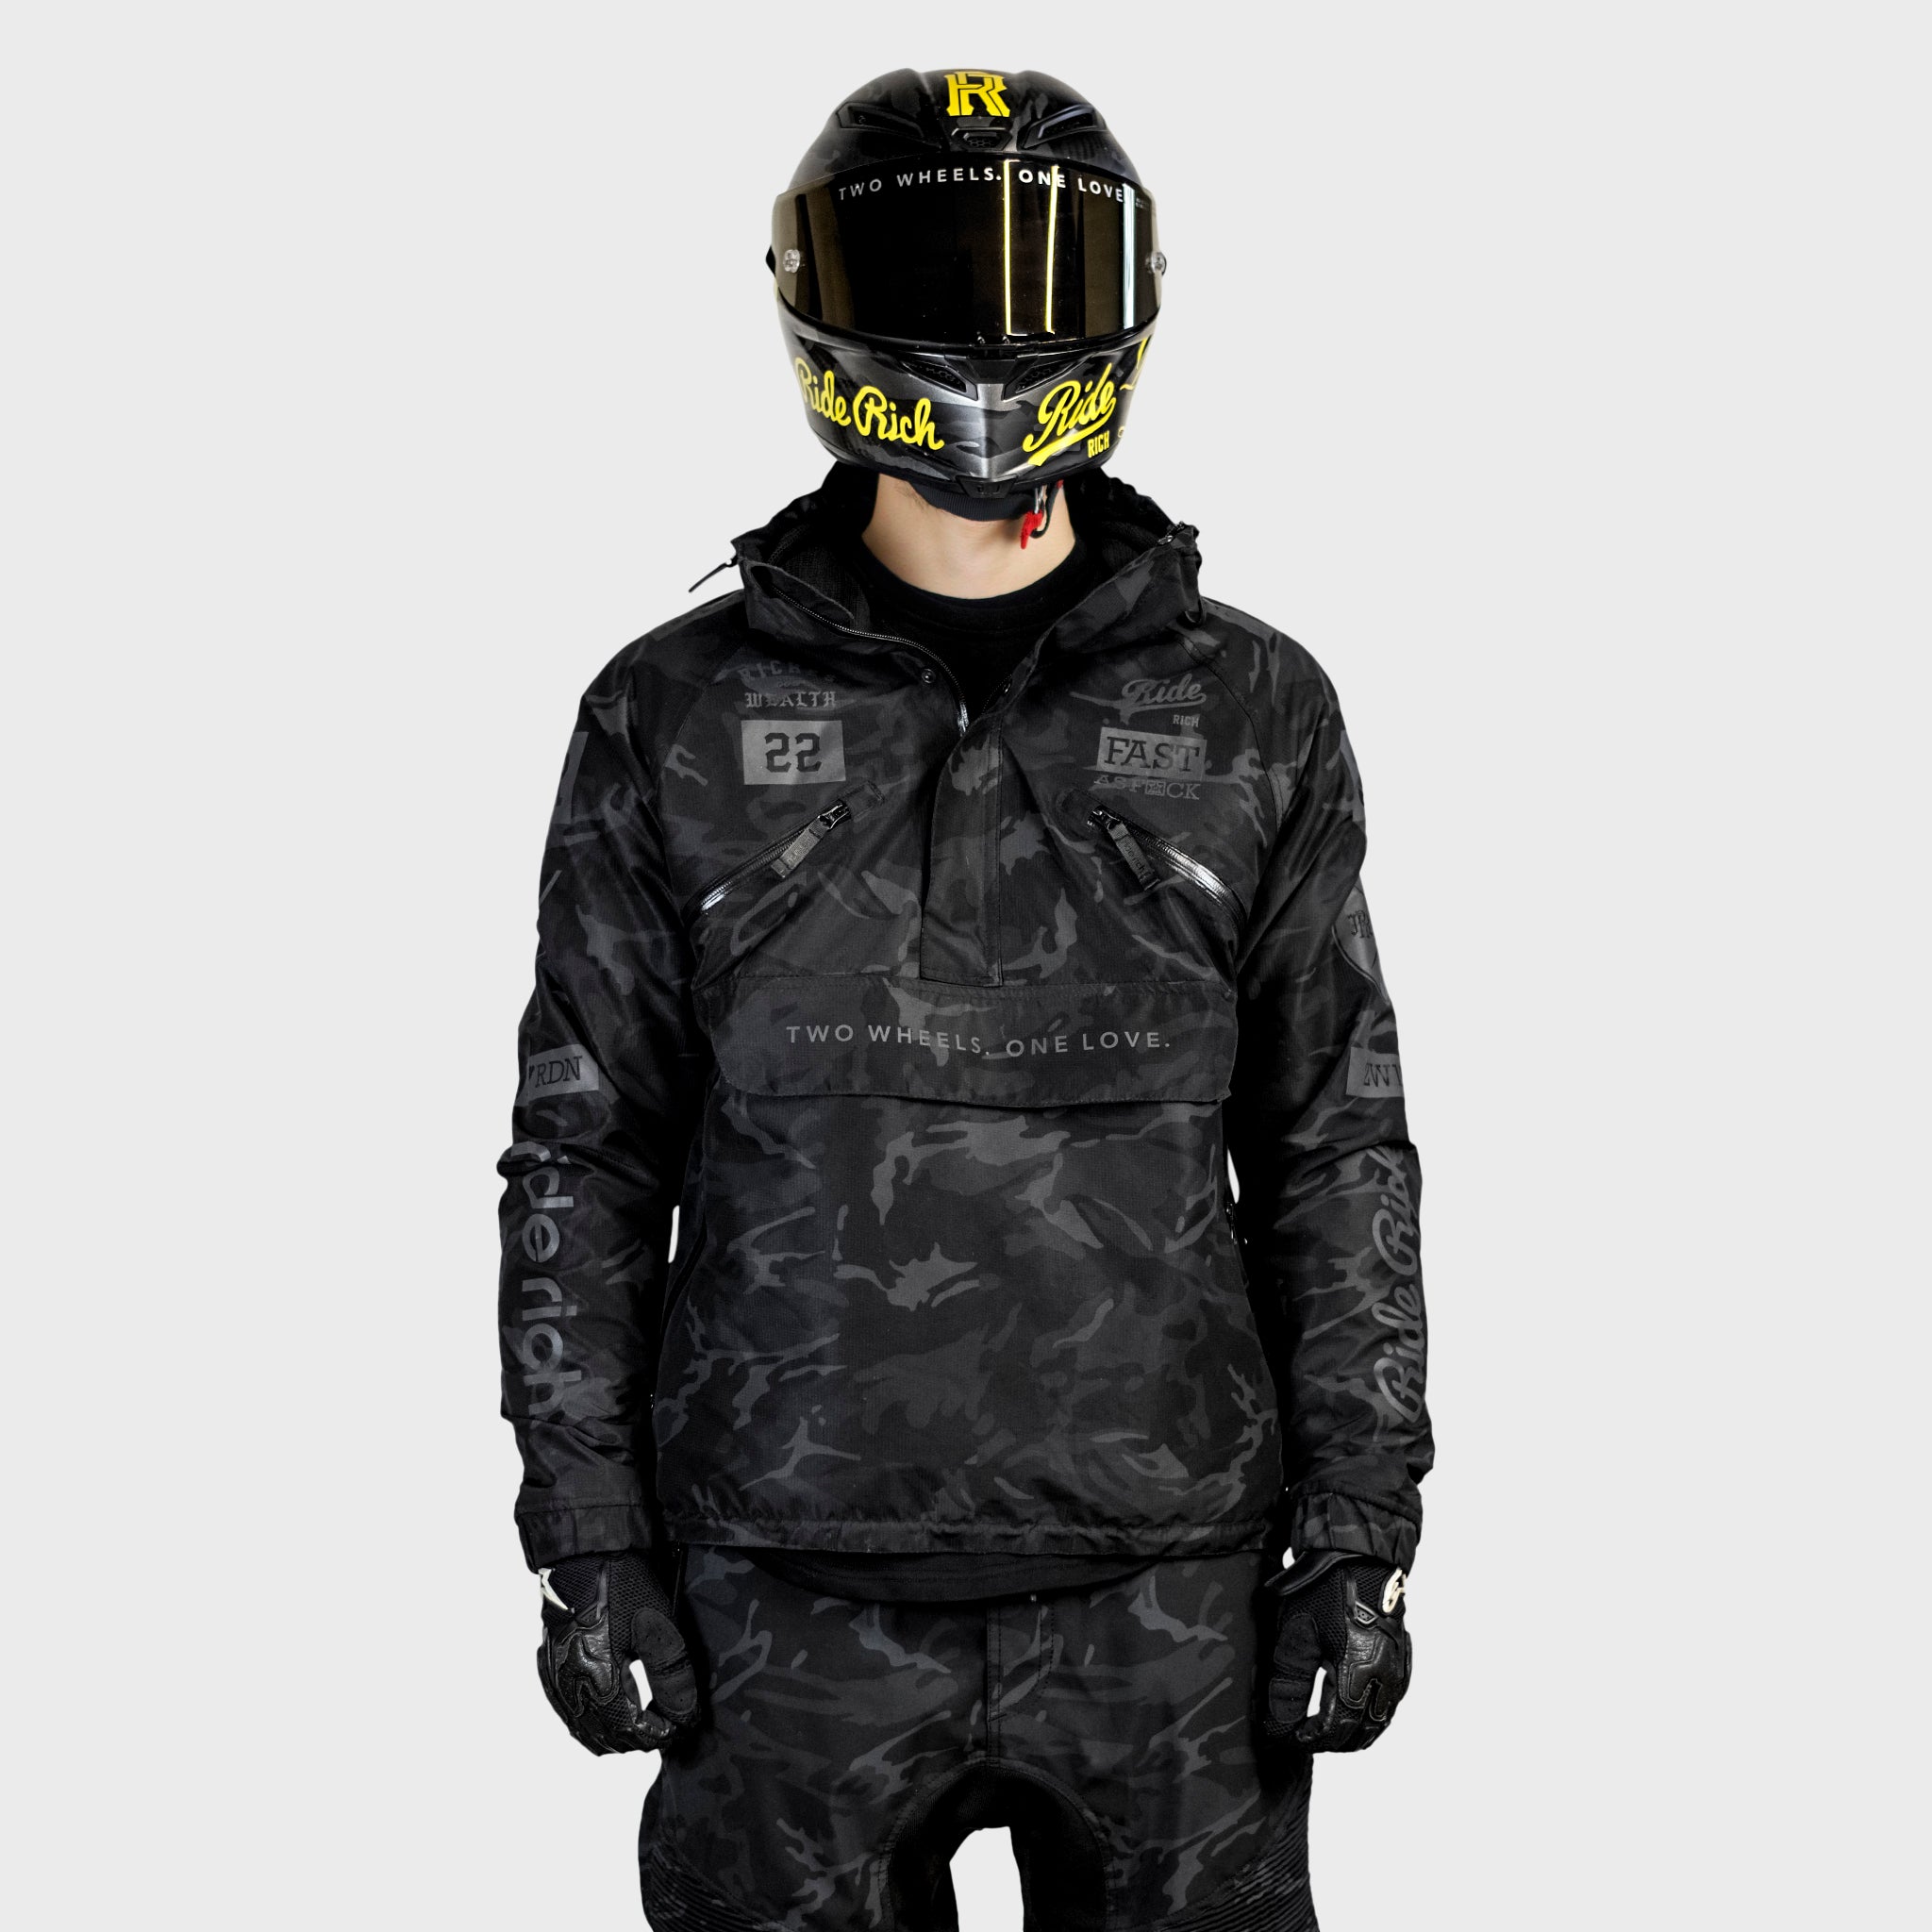 High Performance Thermal Camouflage Jacket – Military Matter